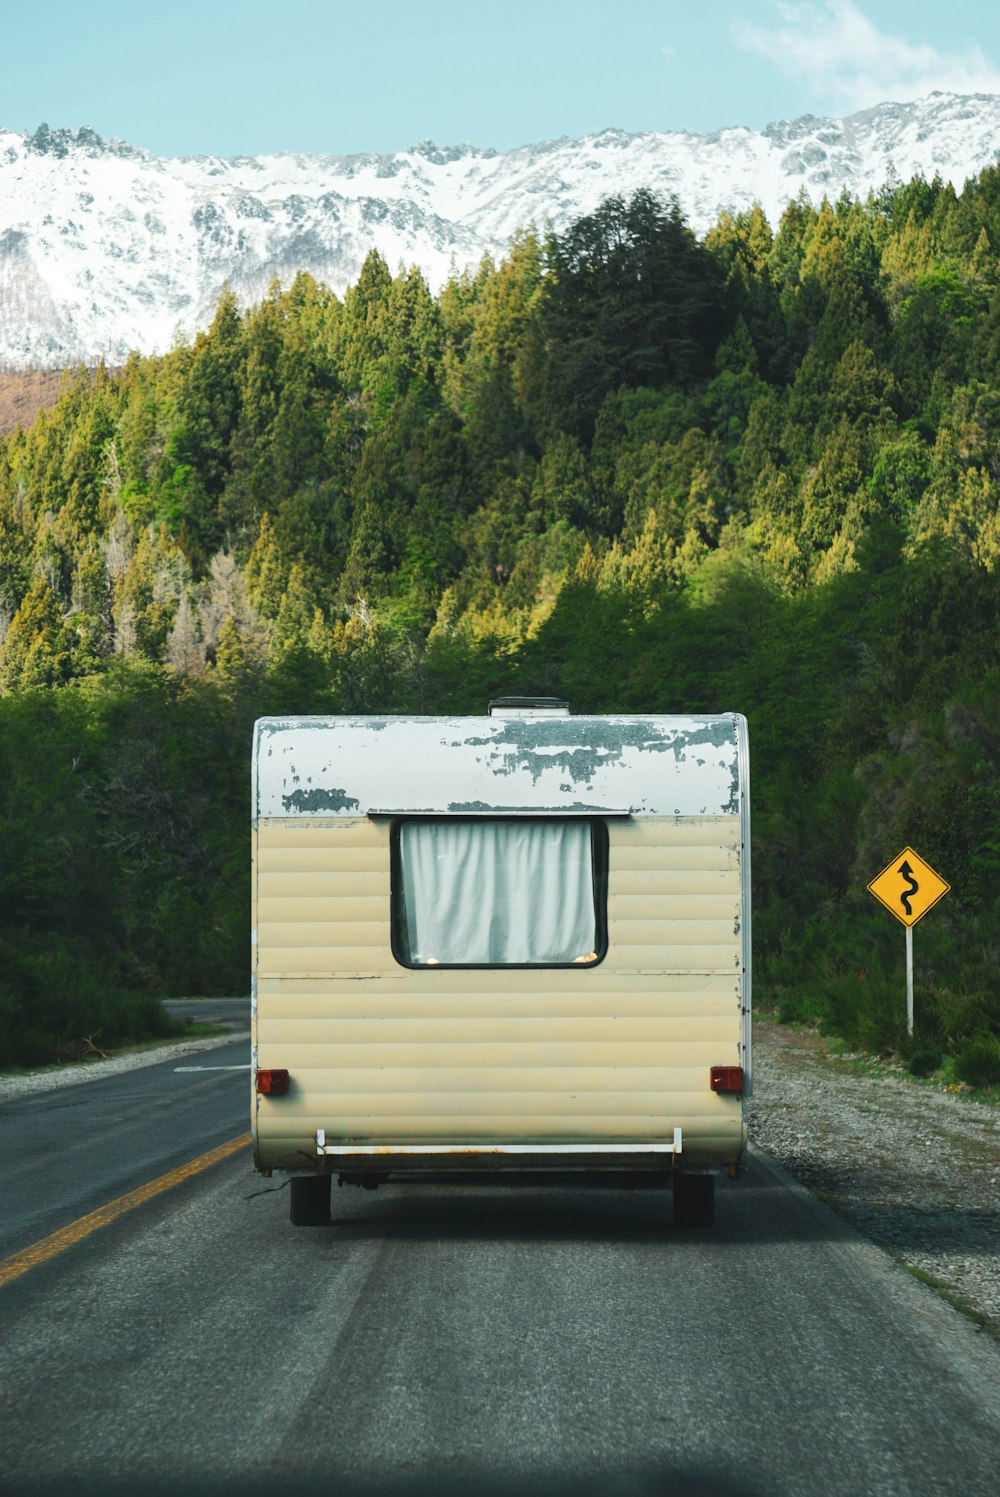 a trailer is parked on the side of the road